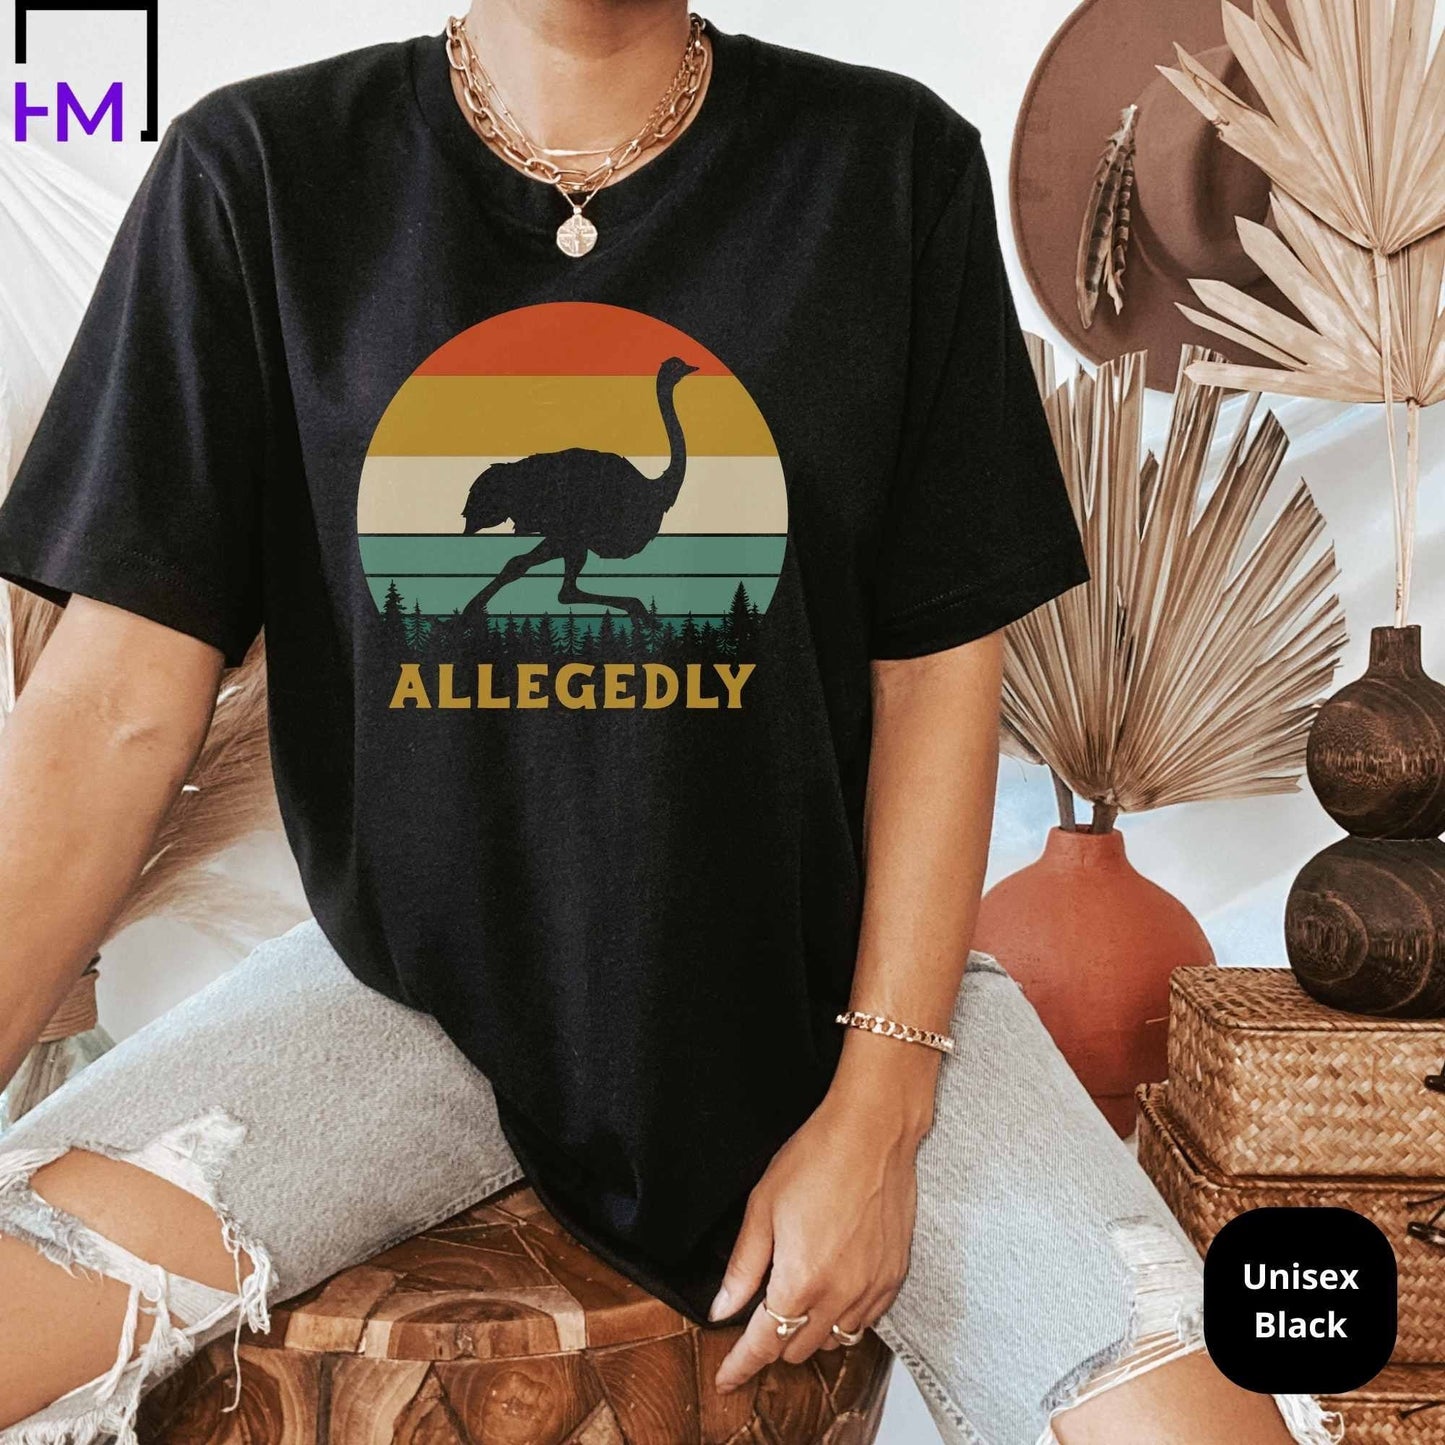 Allagedly Shirt, Allegedly Ostrich, Allegedly Black T-Shirt, Valentines Day Shirt, Gift for Valentines, Gift For Husband, Fathers Day Gift T HMDesignStudioUS